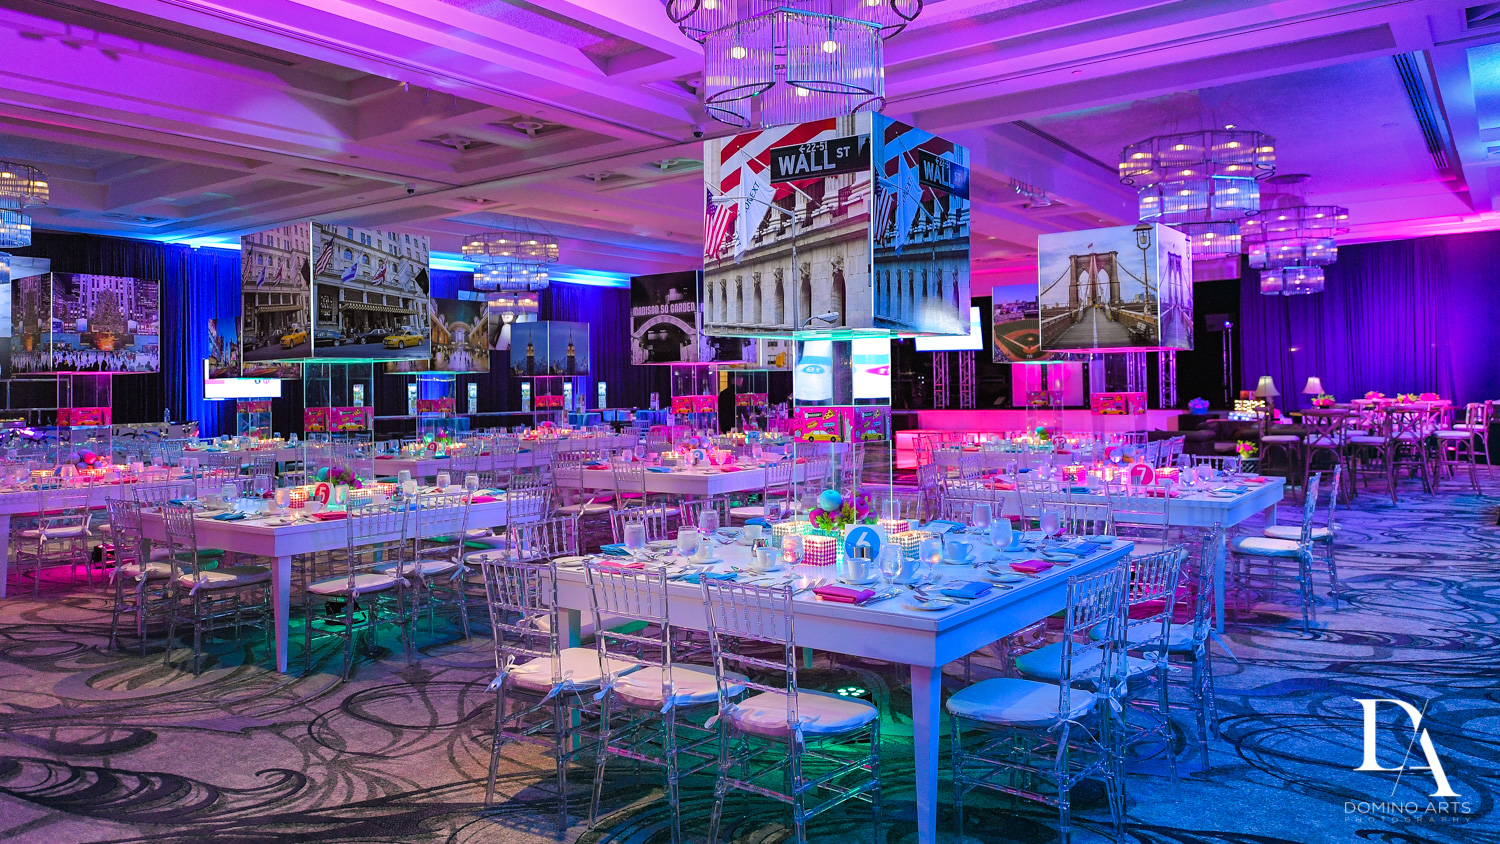 luxury decor at New York Theme Bat Mitzvah at Woodfield Country Club, Boca Raton by Domino Arts Photography